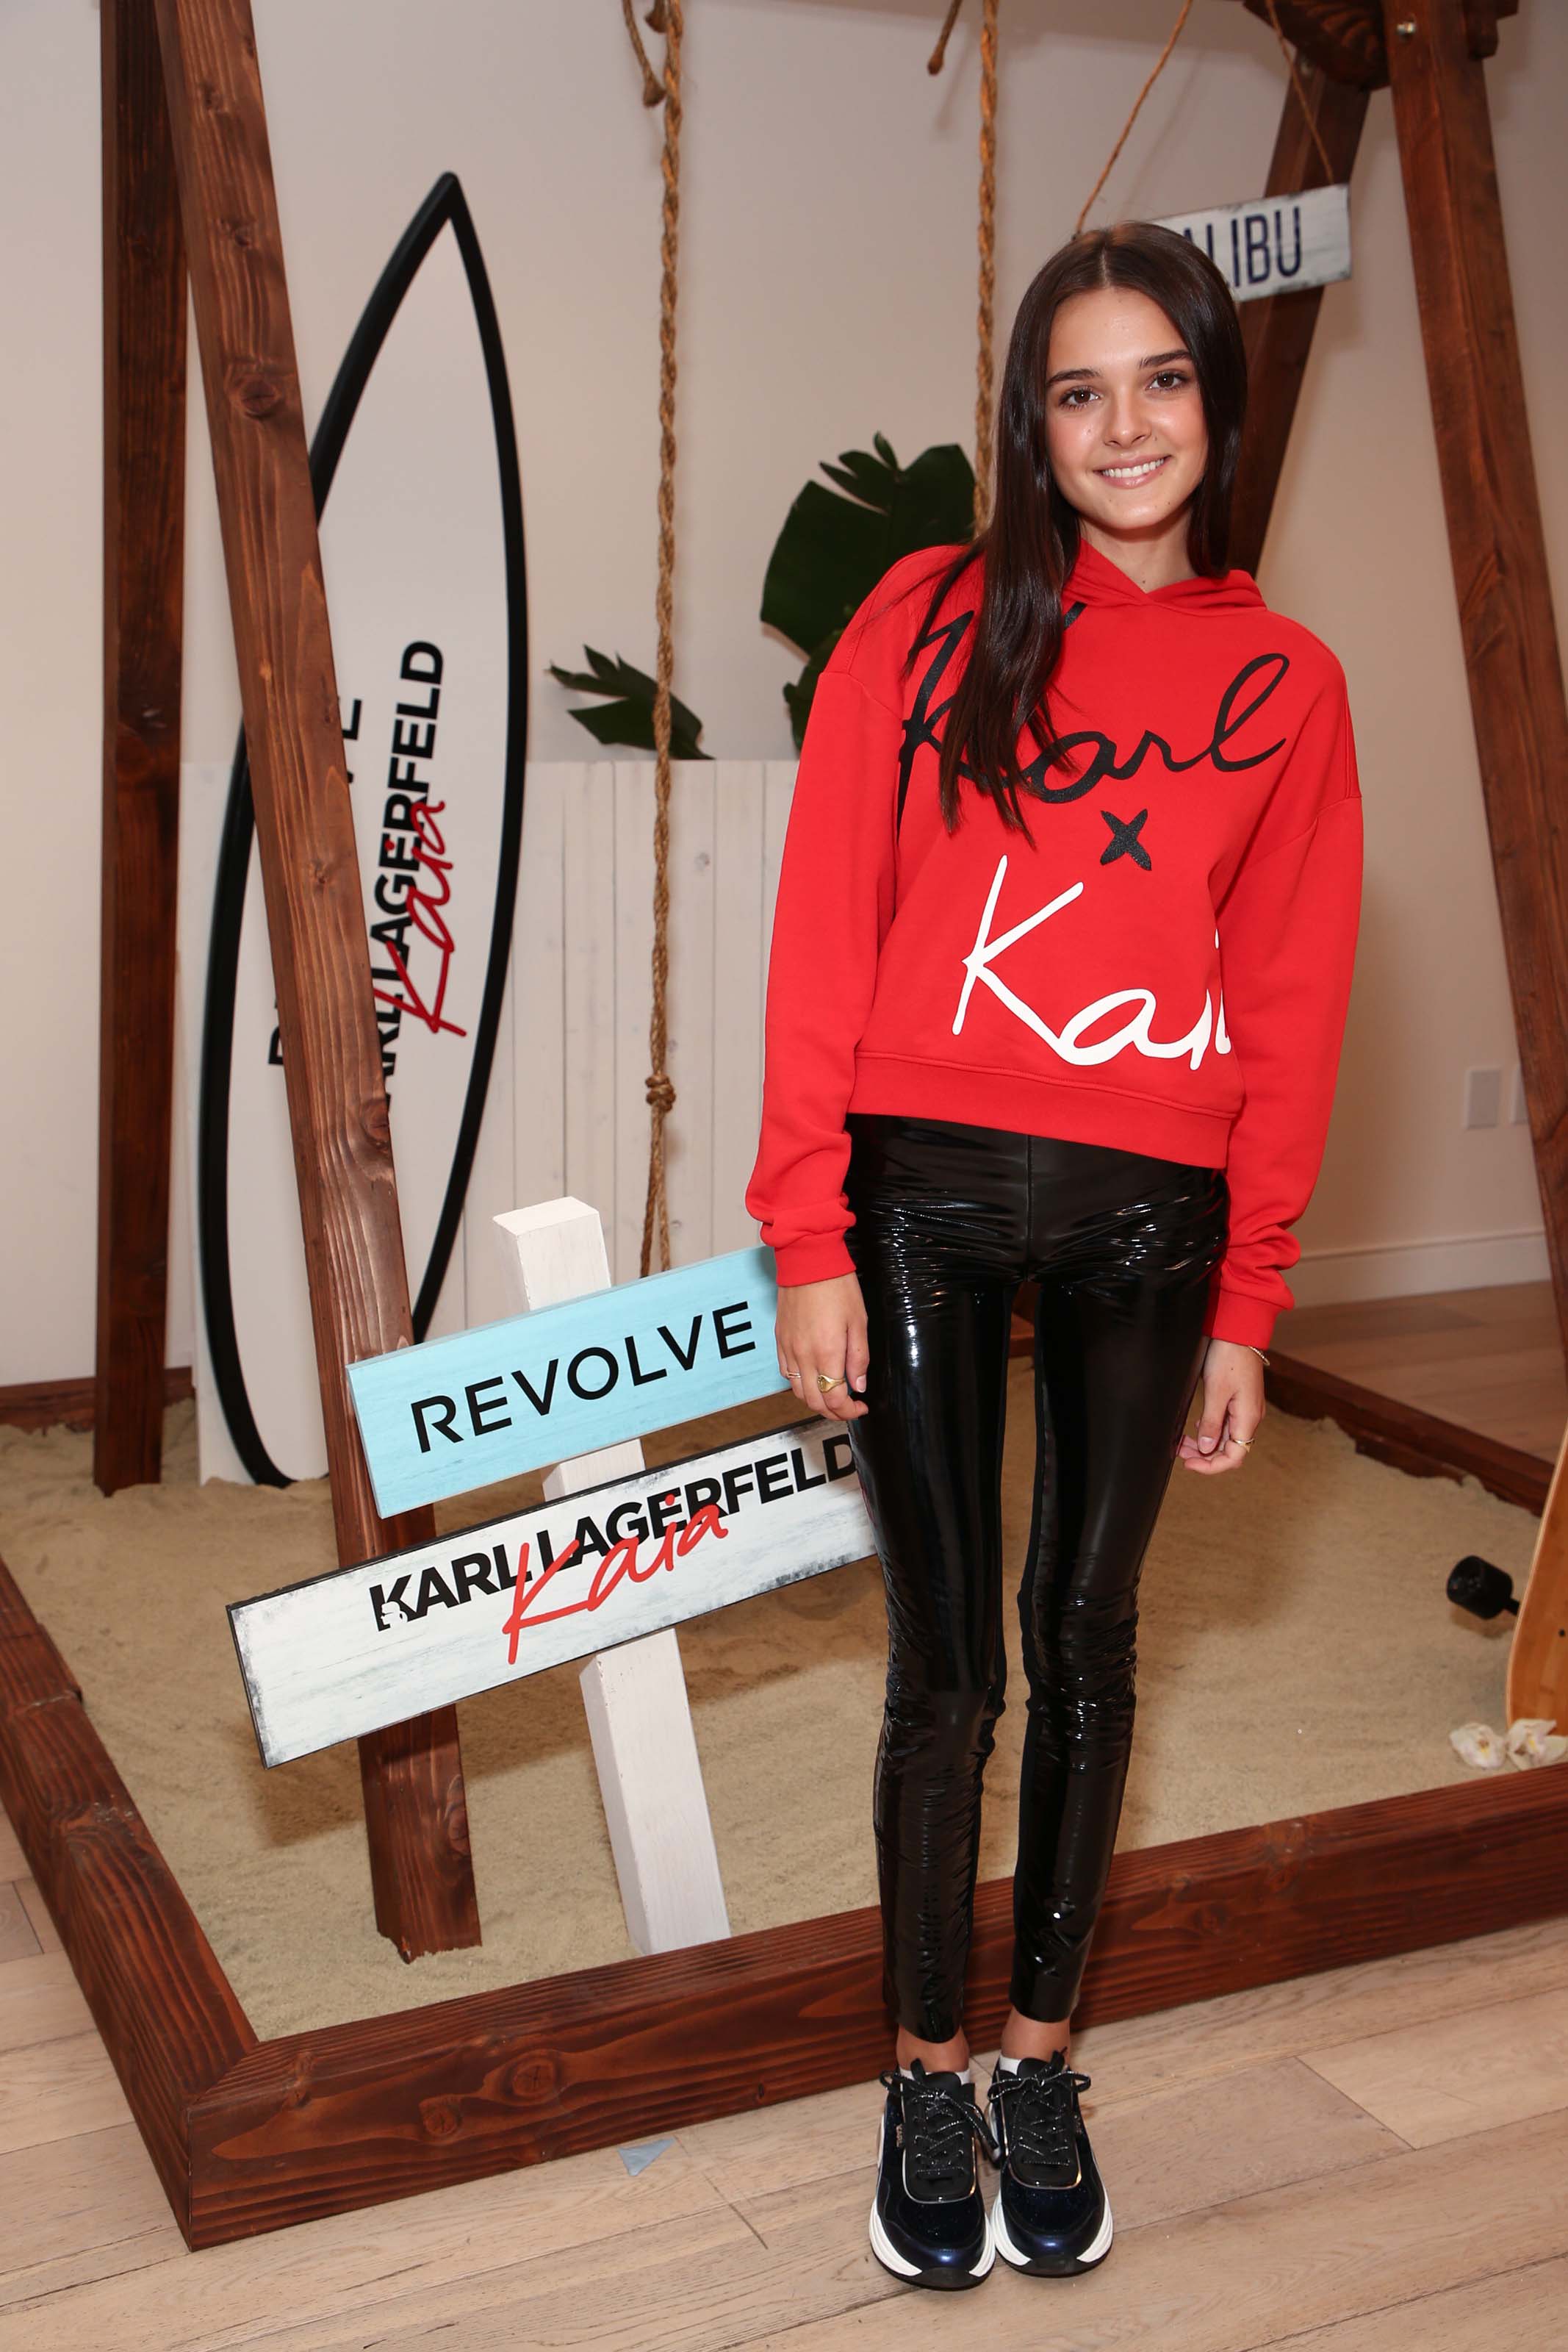 Charlotte Lawrence attends Karl Lagerfeld x Revolve launch